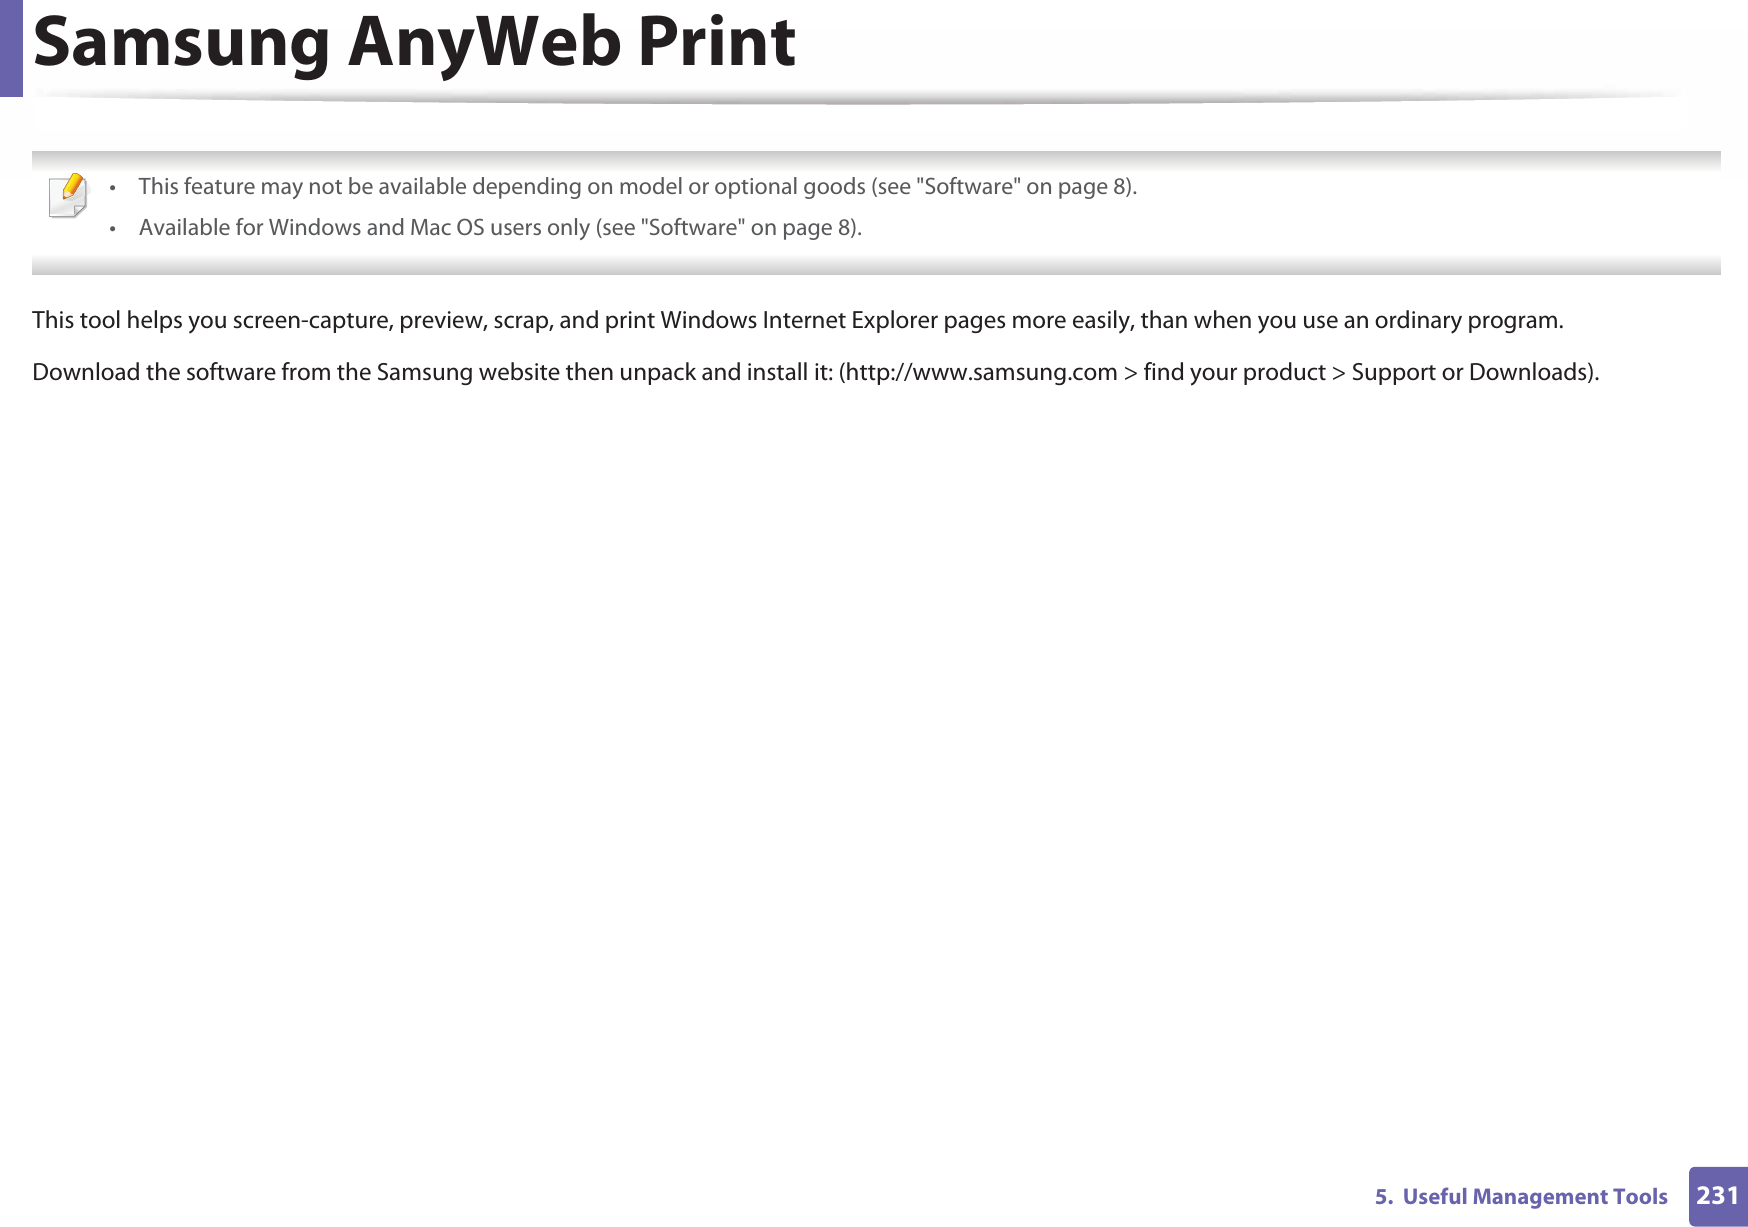 2315.  Useful Management ToolsSamsung AnyWeb Print • This feature may not be available depending on model or optional goods (see &quot;Software&quot; on page 8).• Available for Windows and Mac OS users only (see &quot;Software&quot; on page 8). This tool helps you screen-capture, preview, scrap, and print Windows Internet Explorer pages more easily, than when you use an ordinary program. Download the software from the Samsung website then unpack and install it: (http://www.samsung.com &gt; find your product &gt; Support or Downloads).